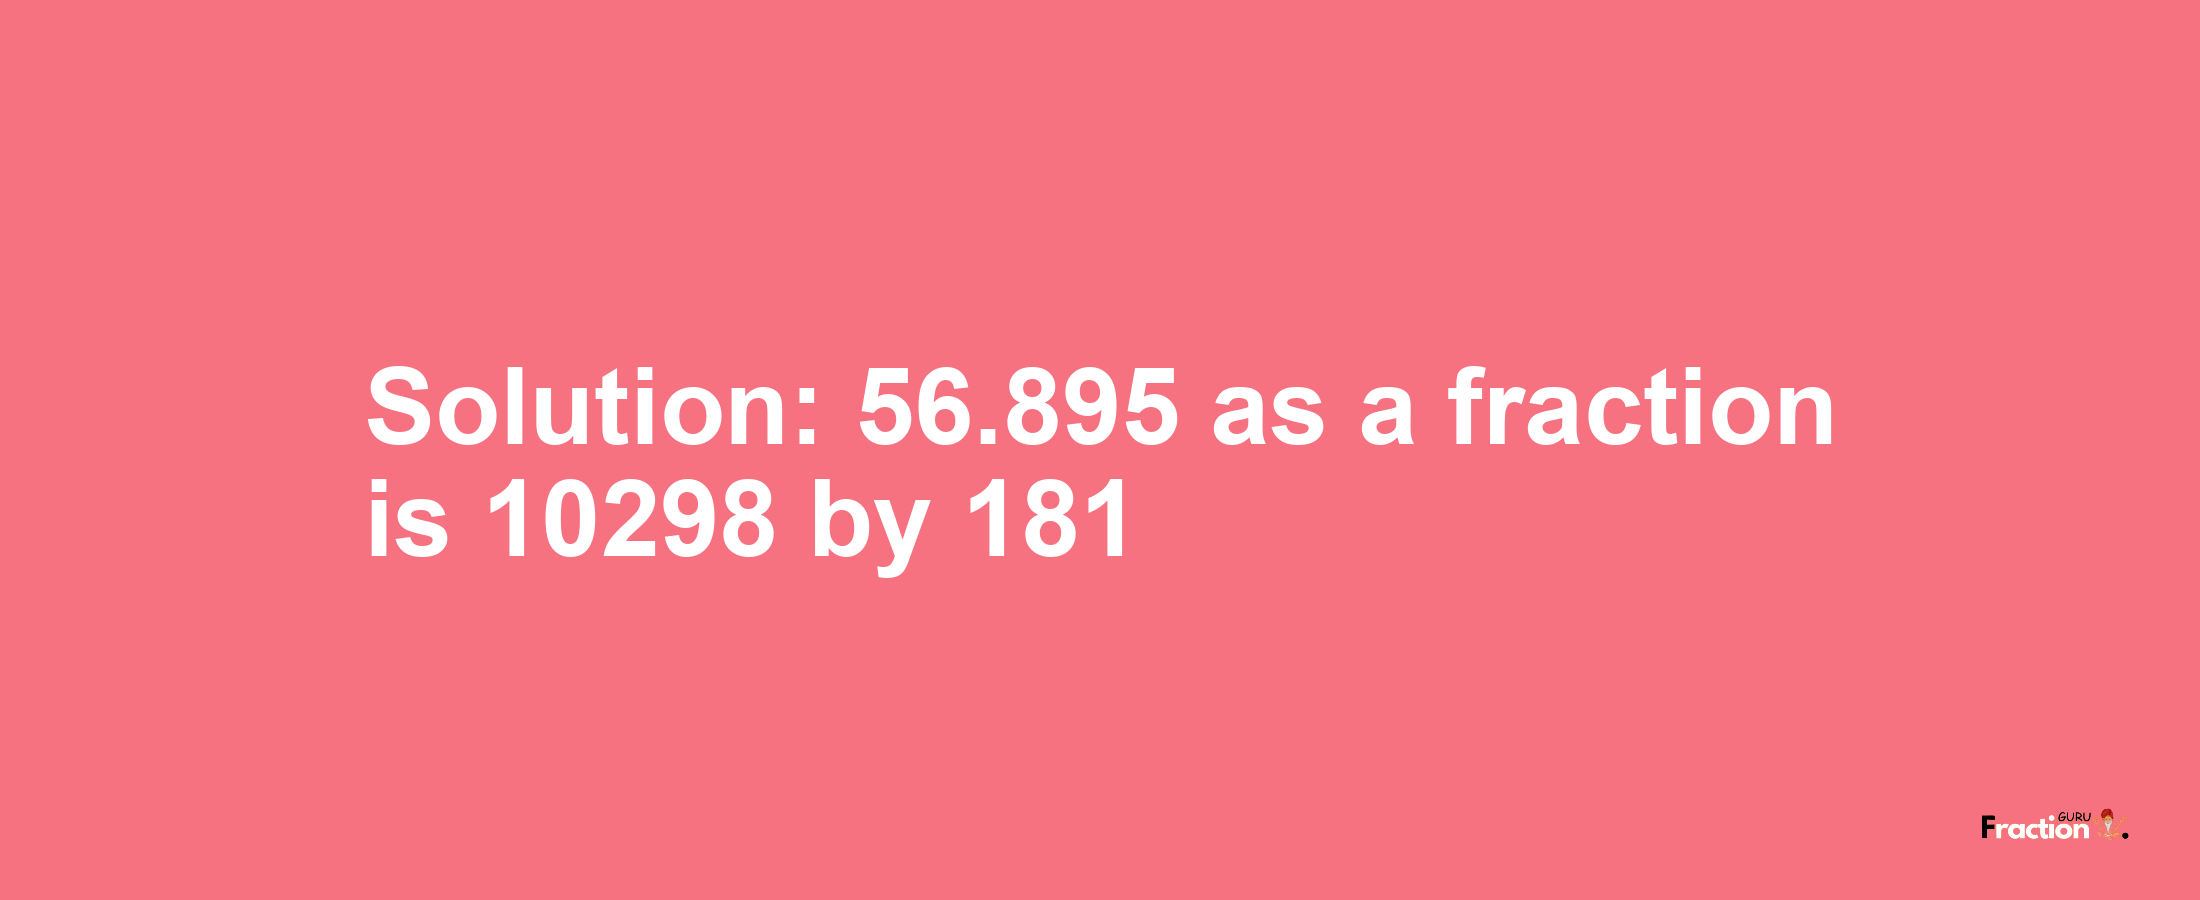 Solution:56.895 as a fraction is 10298/181